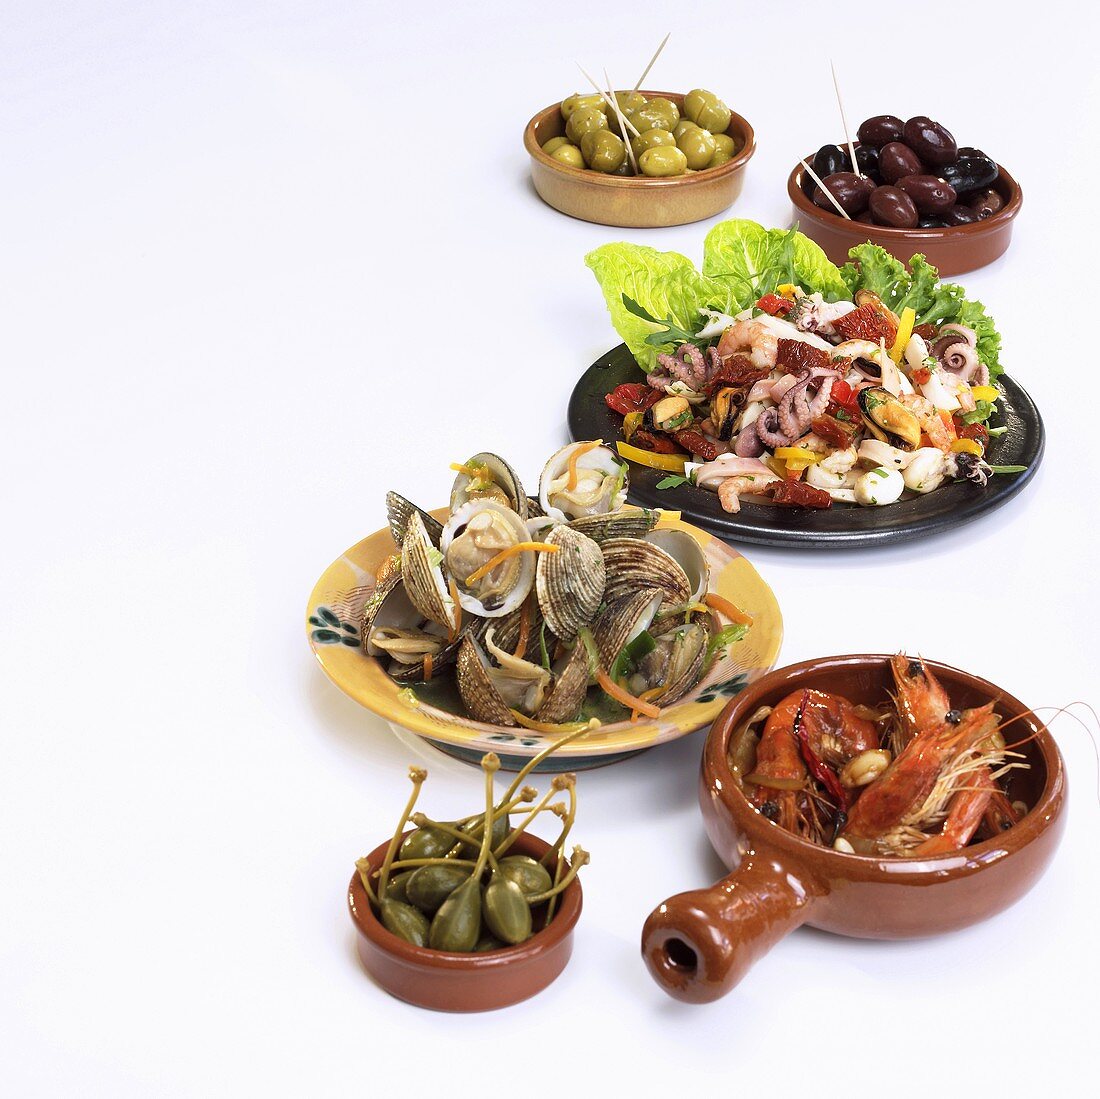 Assorted tapas (capers, seafood and olives)